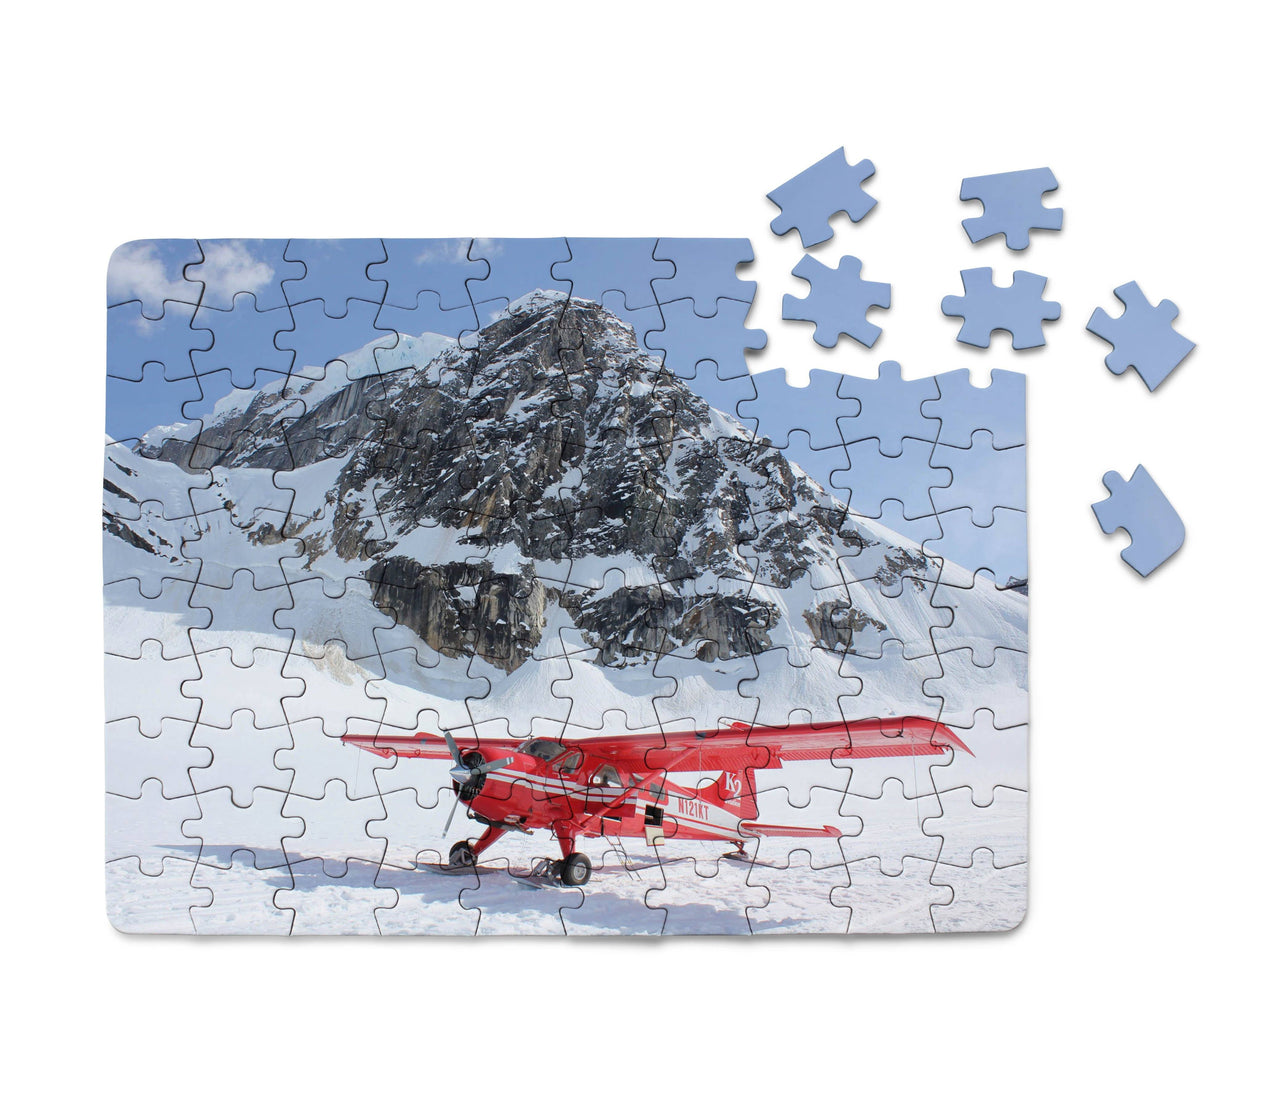 Amazing Snow Airplane Printed Puzzles Aviation Shop 